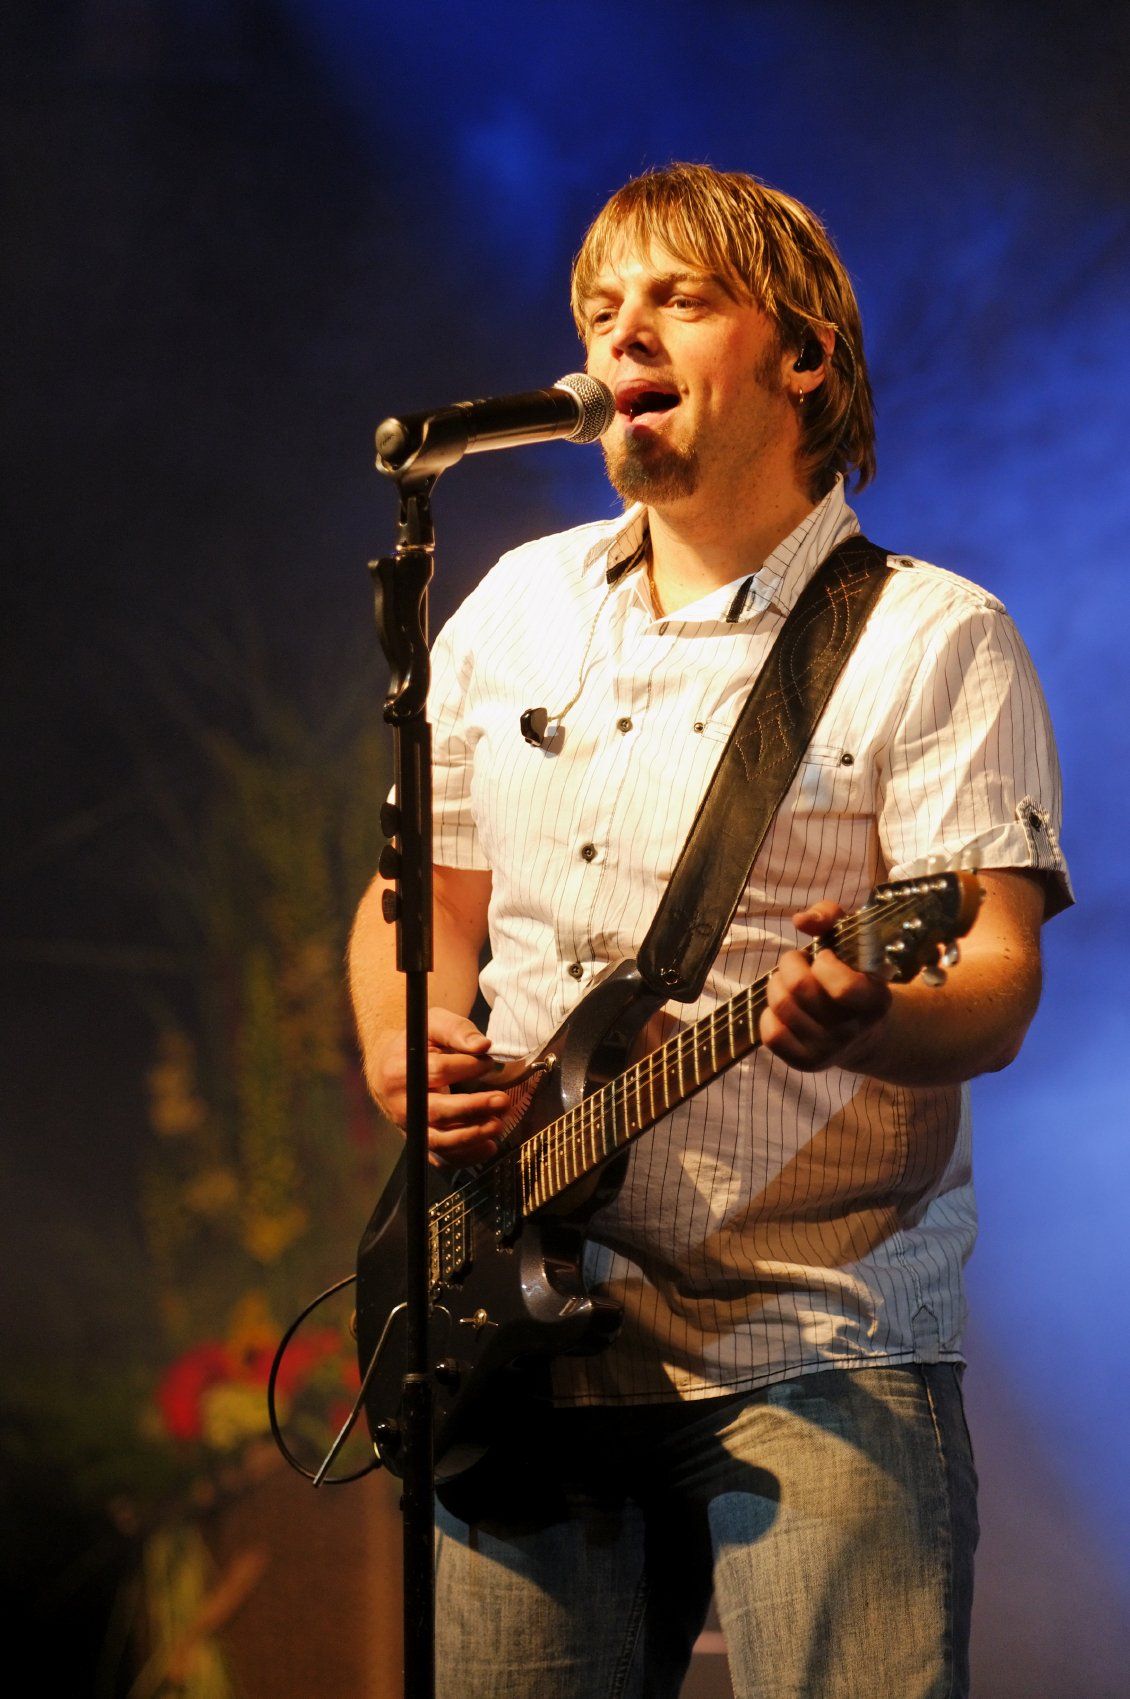 Male musician standing at the microphone, playing a guitar and singing.